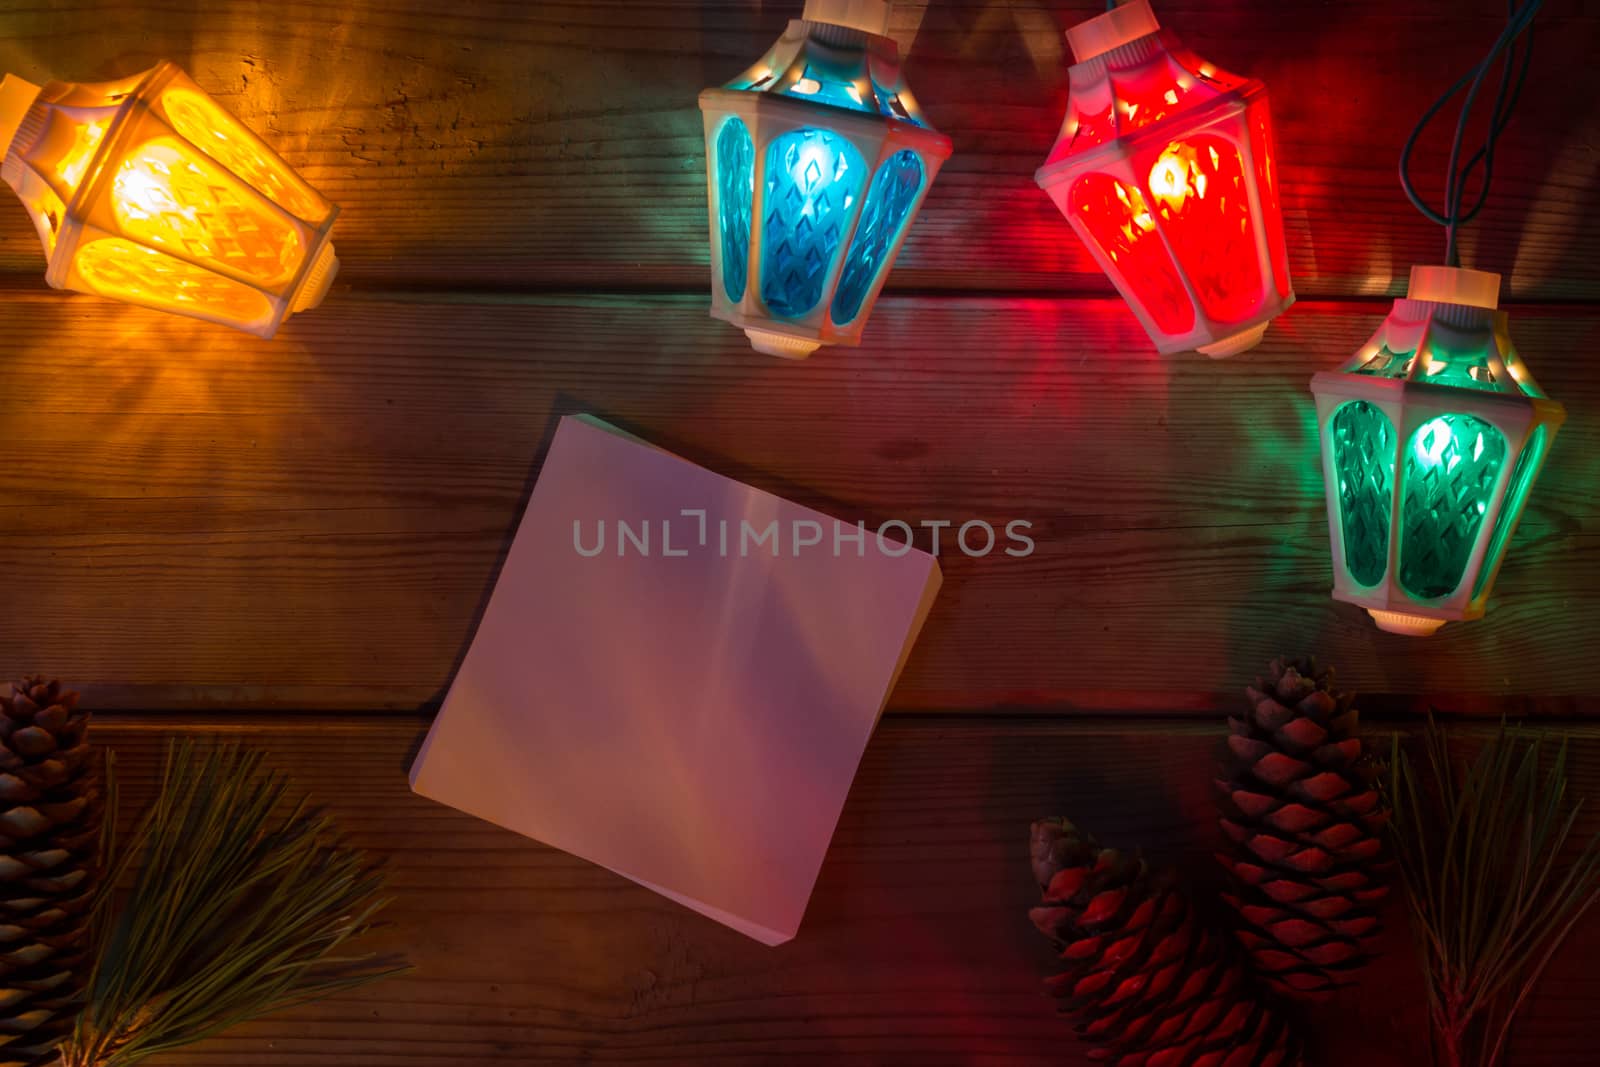 Christmas tree garland and balls on wooden table mock up by liwei12